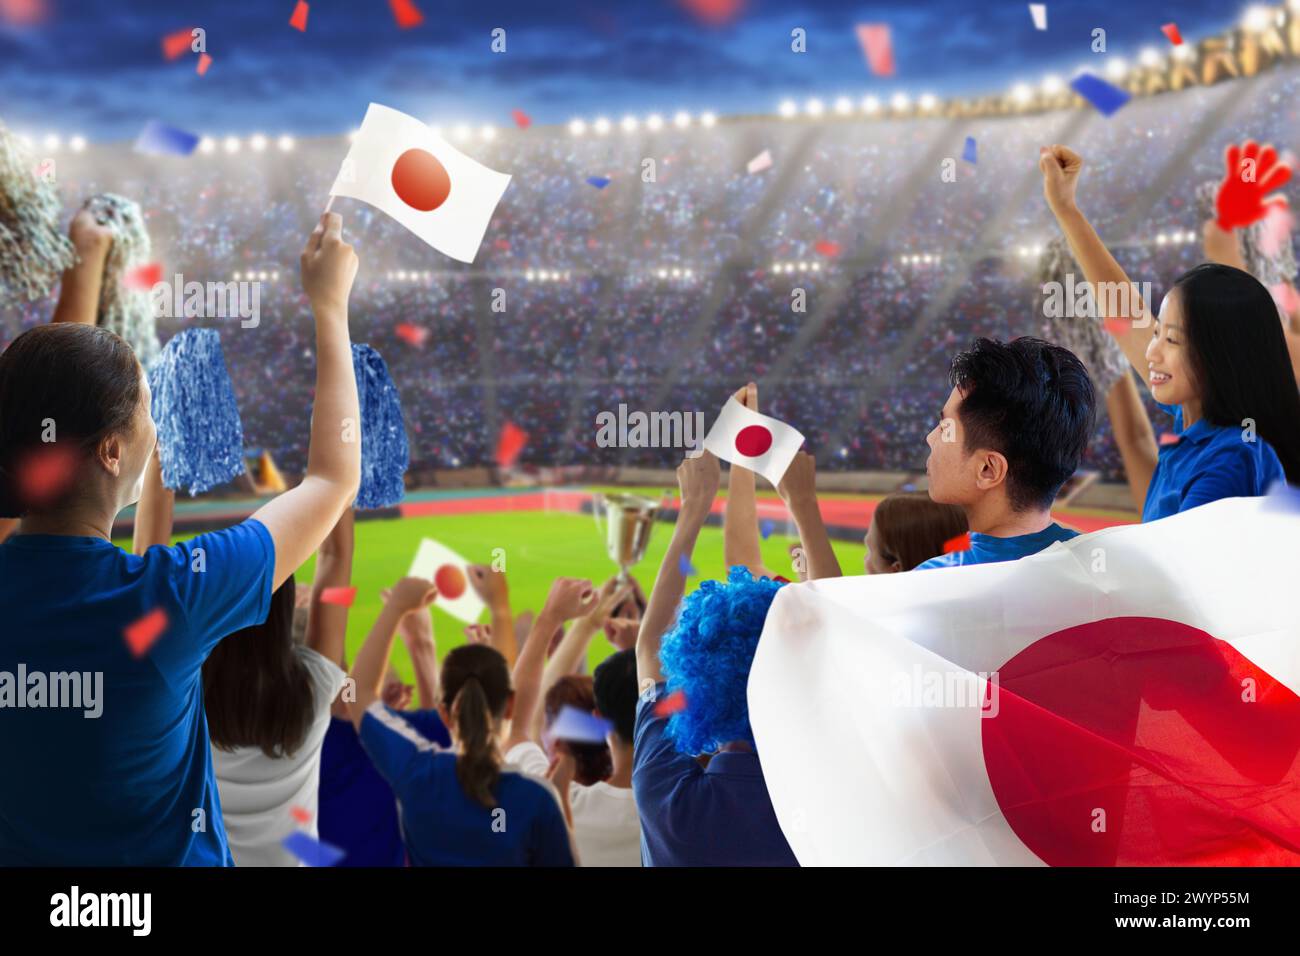 Japan football supporter on stadium. Japanese fans on soccer pitch watching team play. Group of supporters with flag and national jersey cheering Stock Photo